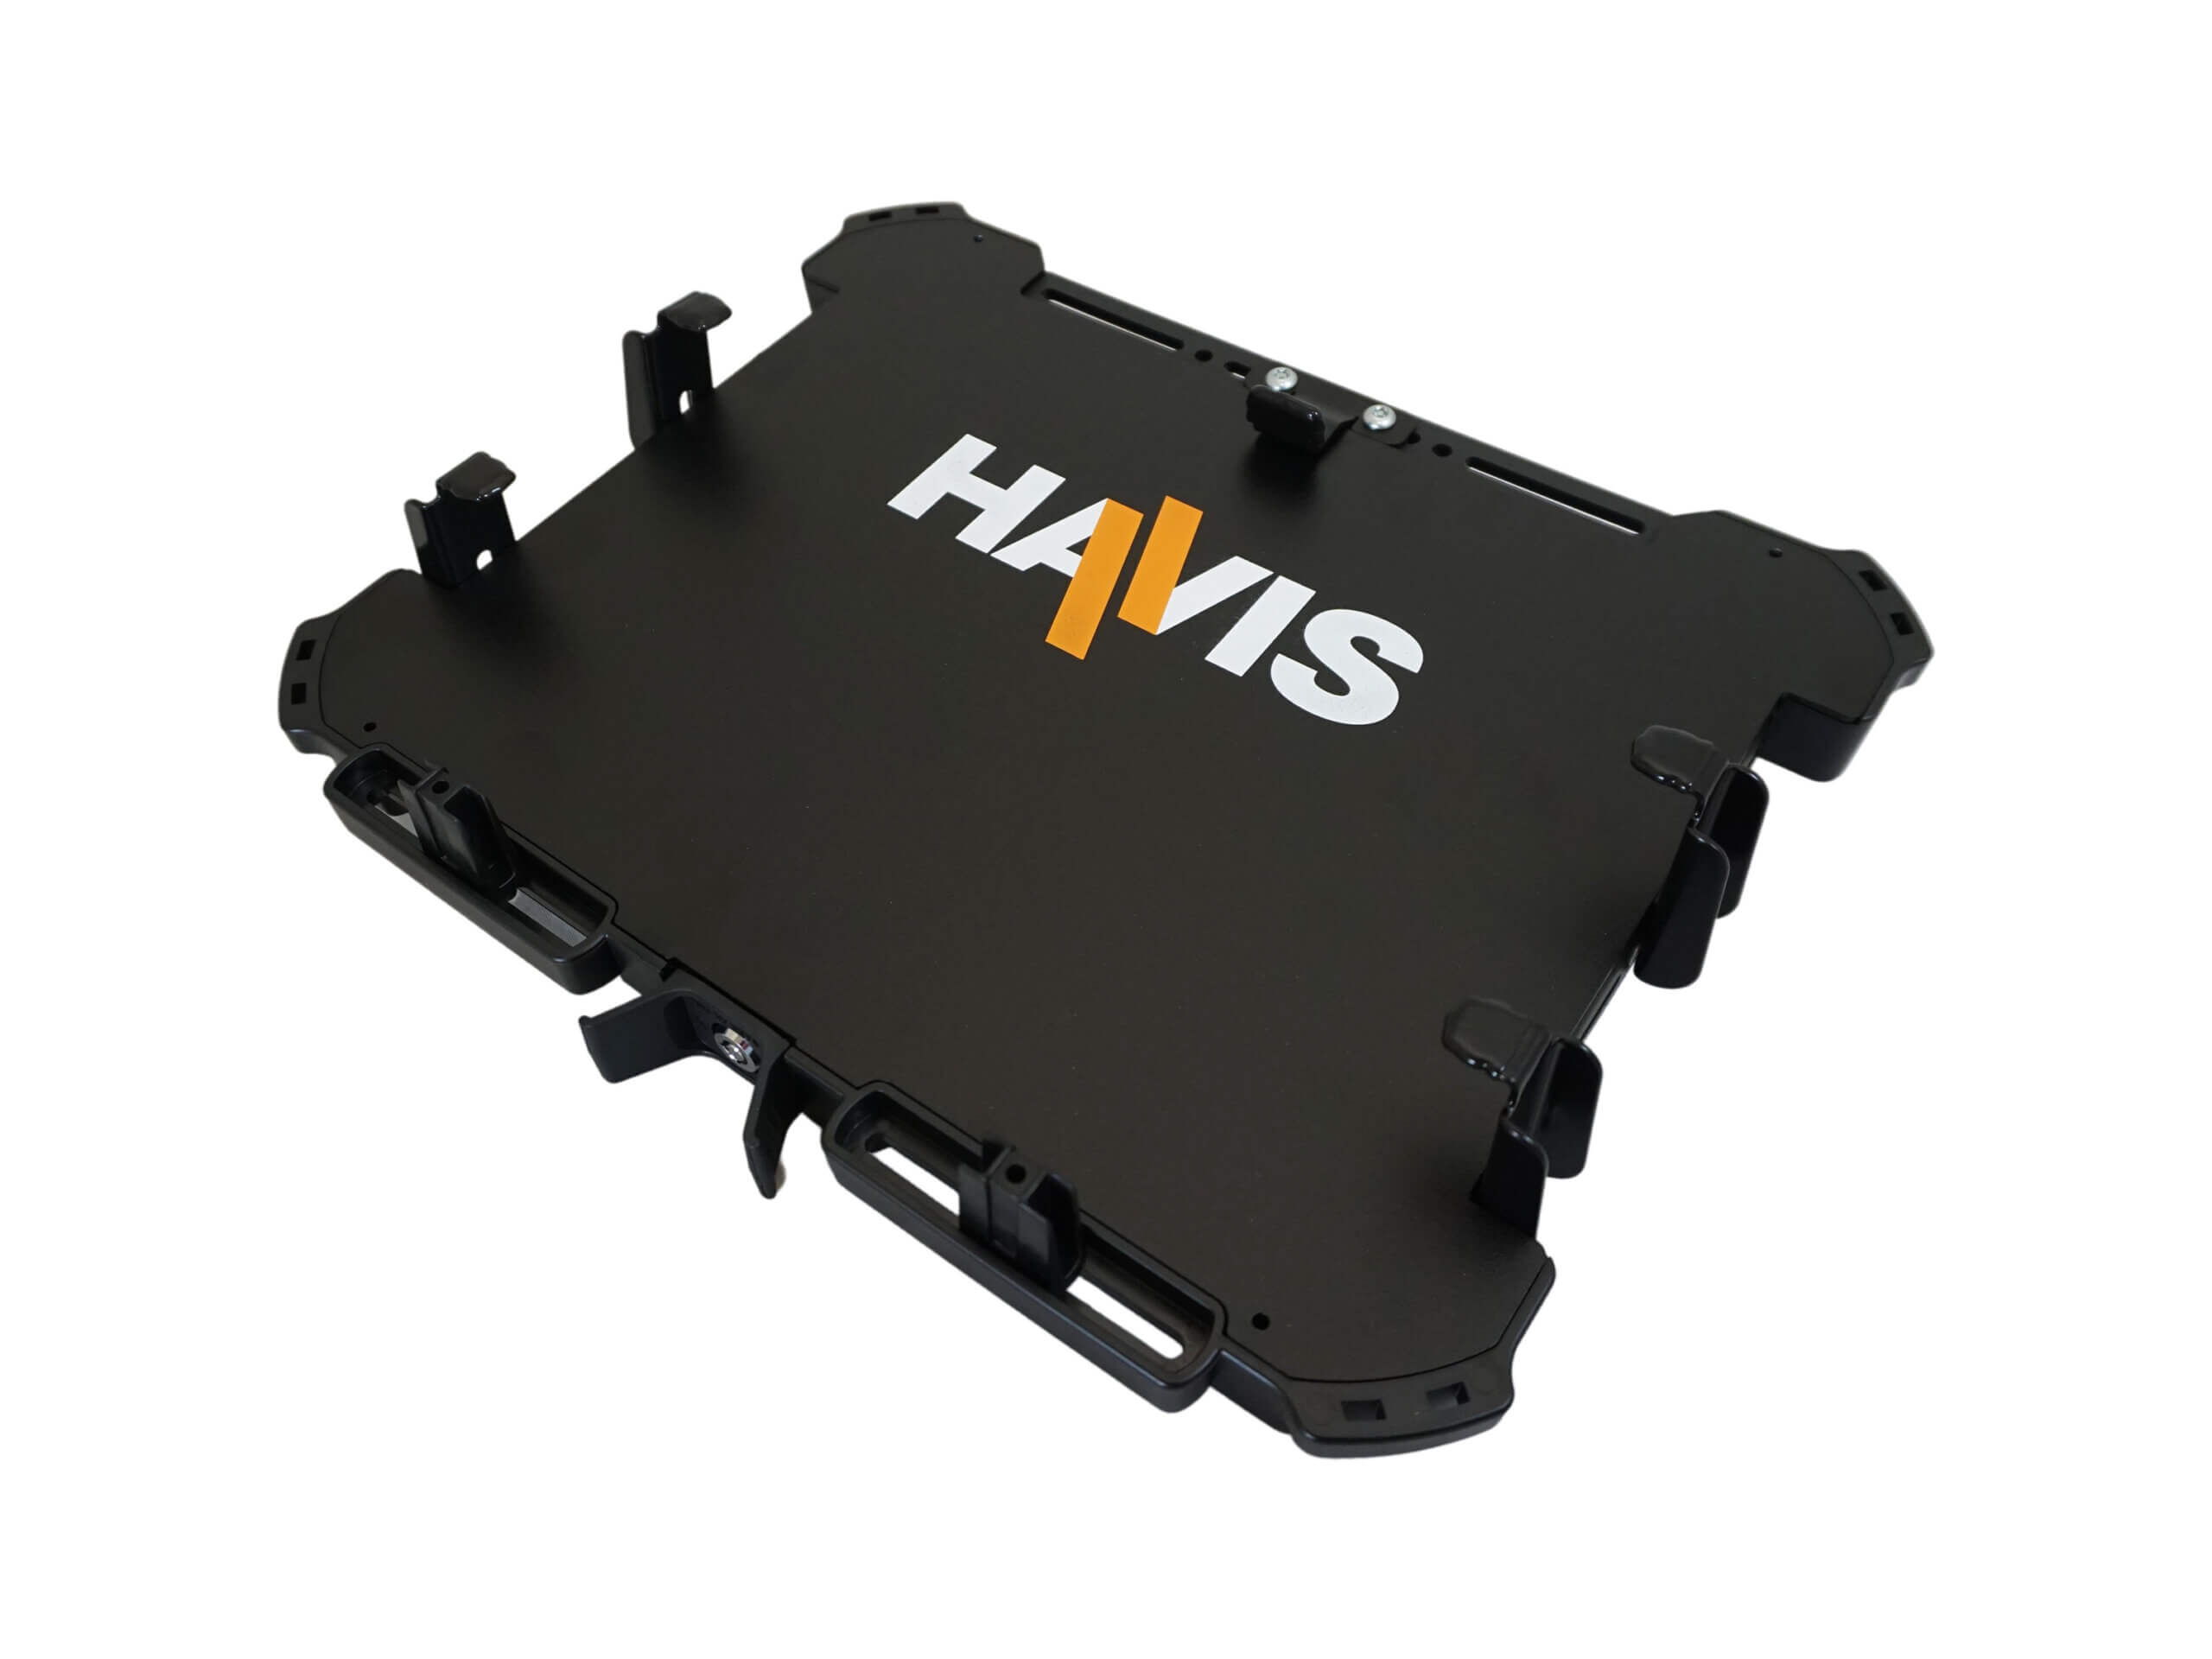 Havis Rugged Cradle for Dell 5430 and 7330 Rugged Notebooks